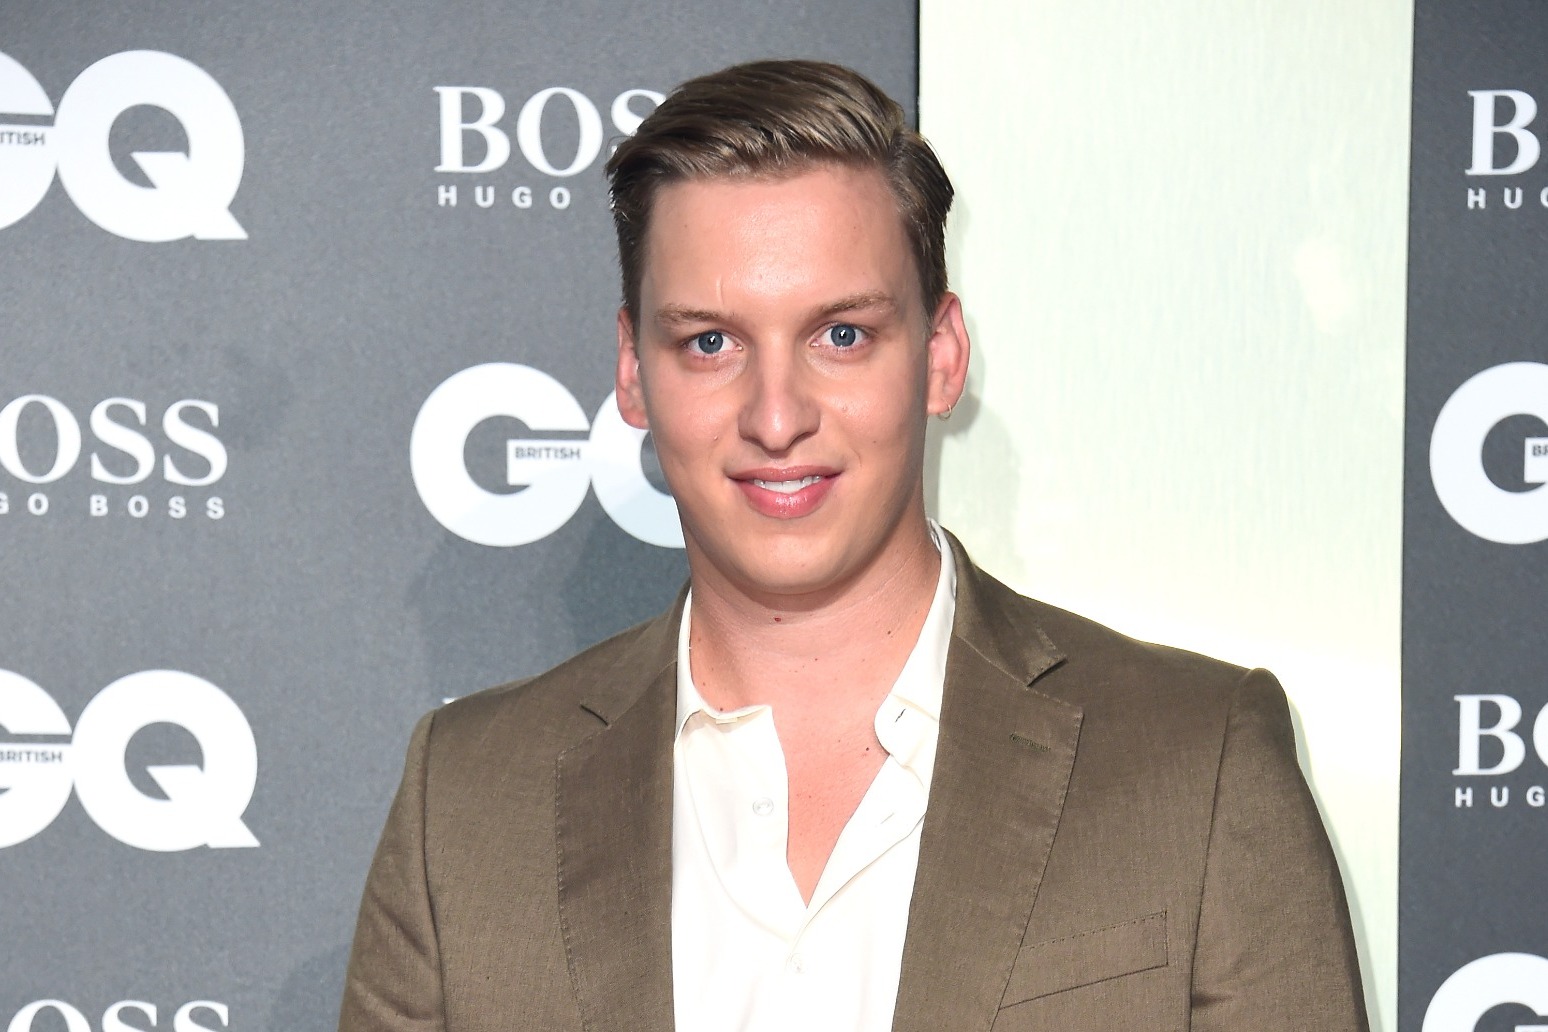 George Ezra will kick off Bafta TV awards with special red carpet performance 